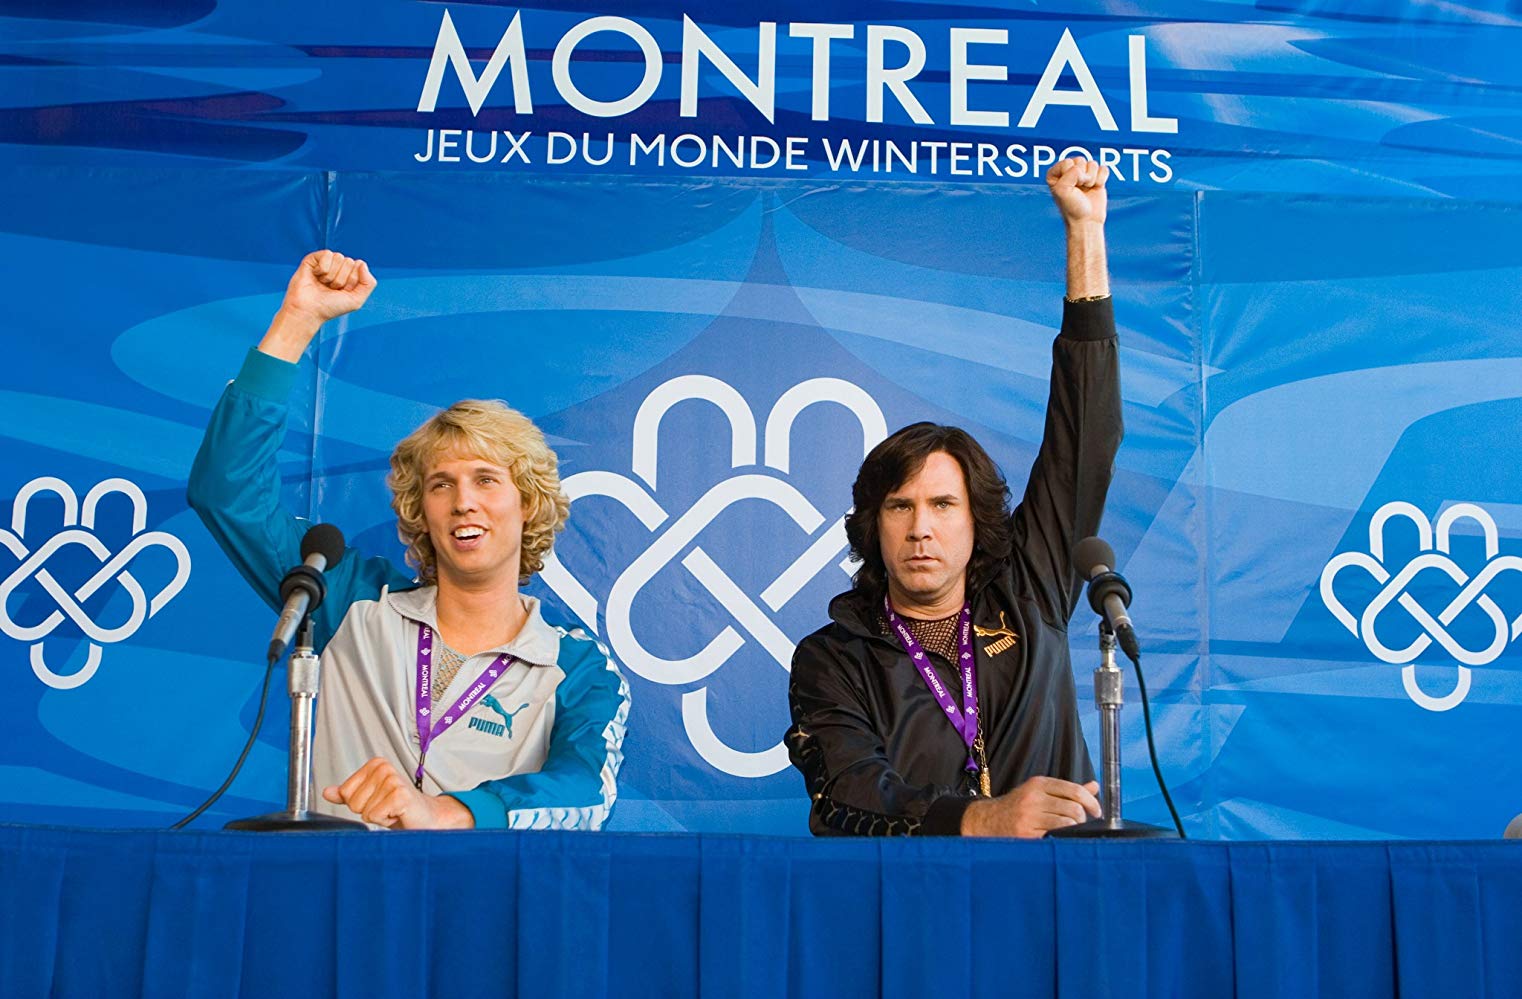 Two men on a panel at a press conference after a figure skating competition, both holding their fists in the air with the title “Montreal Jeux De Monde Wintersports” displayed behind them.